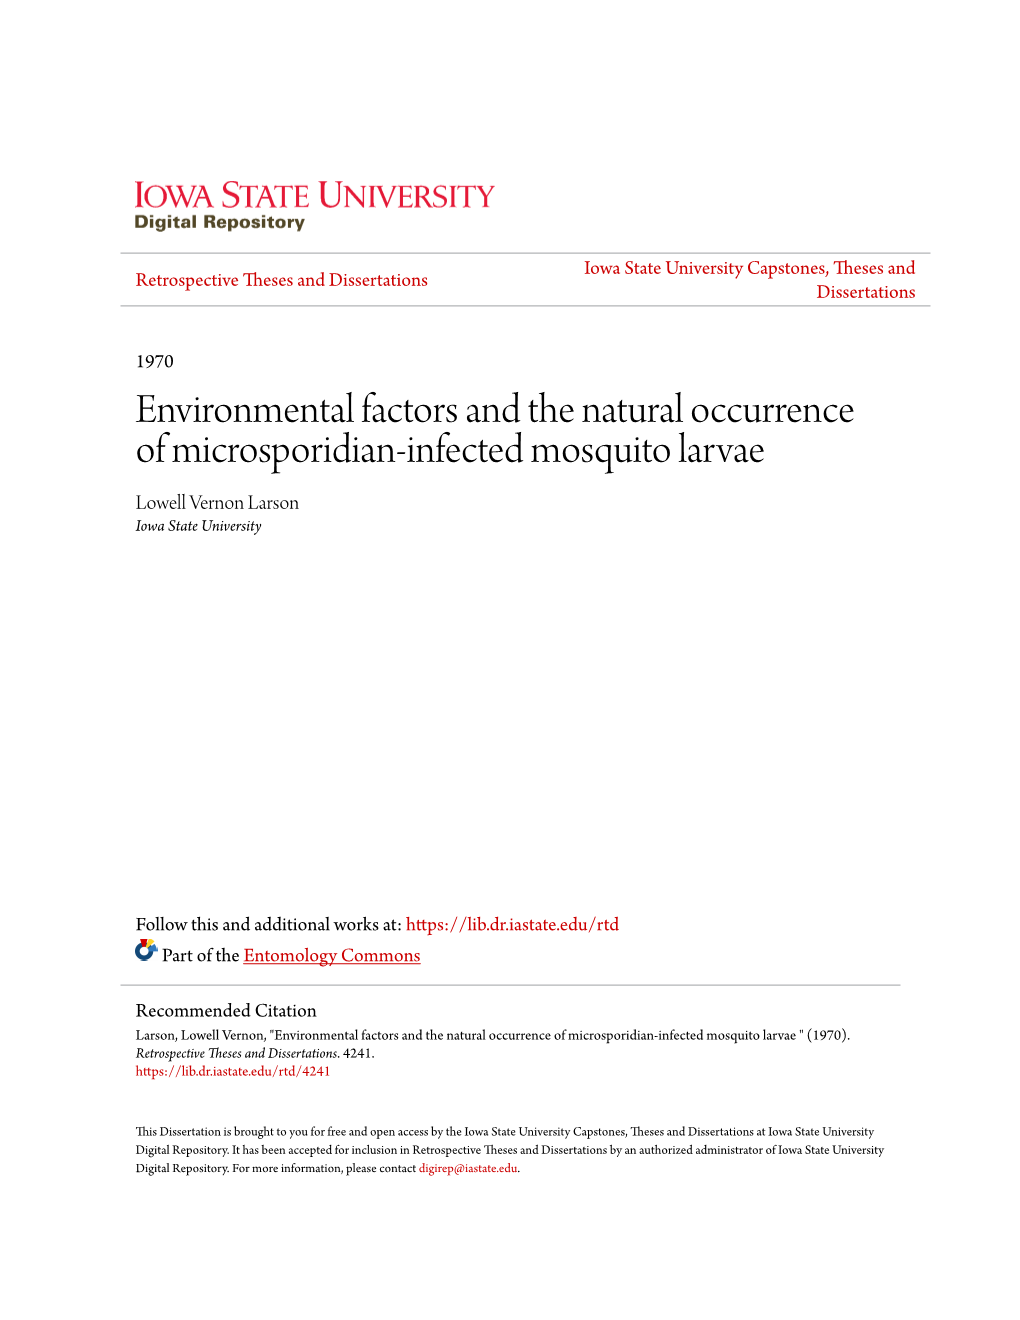 Environmental Factors and the Natural Occurrence of Microsporidian-Infected Mosquito Larvae Lowell Vernon Larson Iowa State University